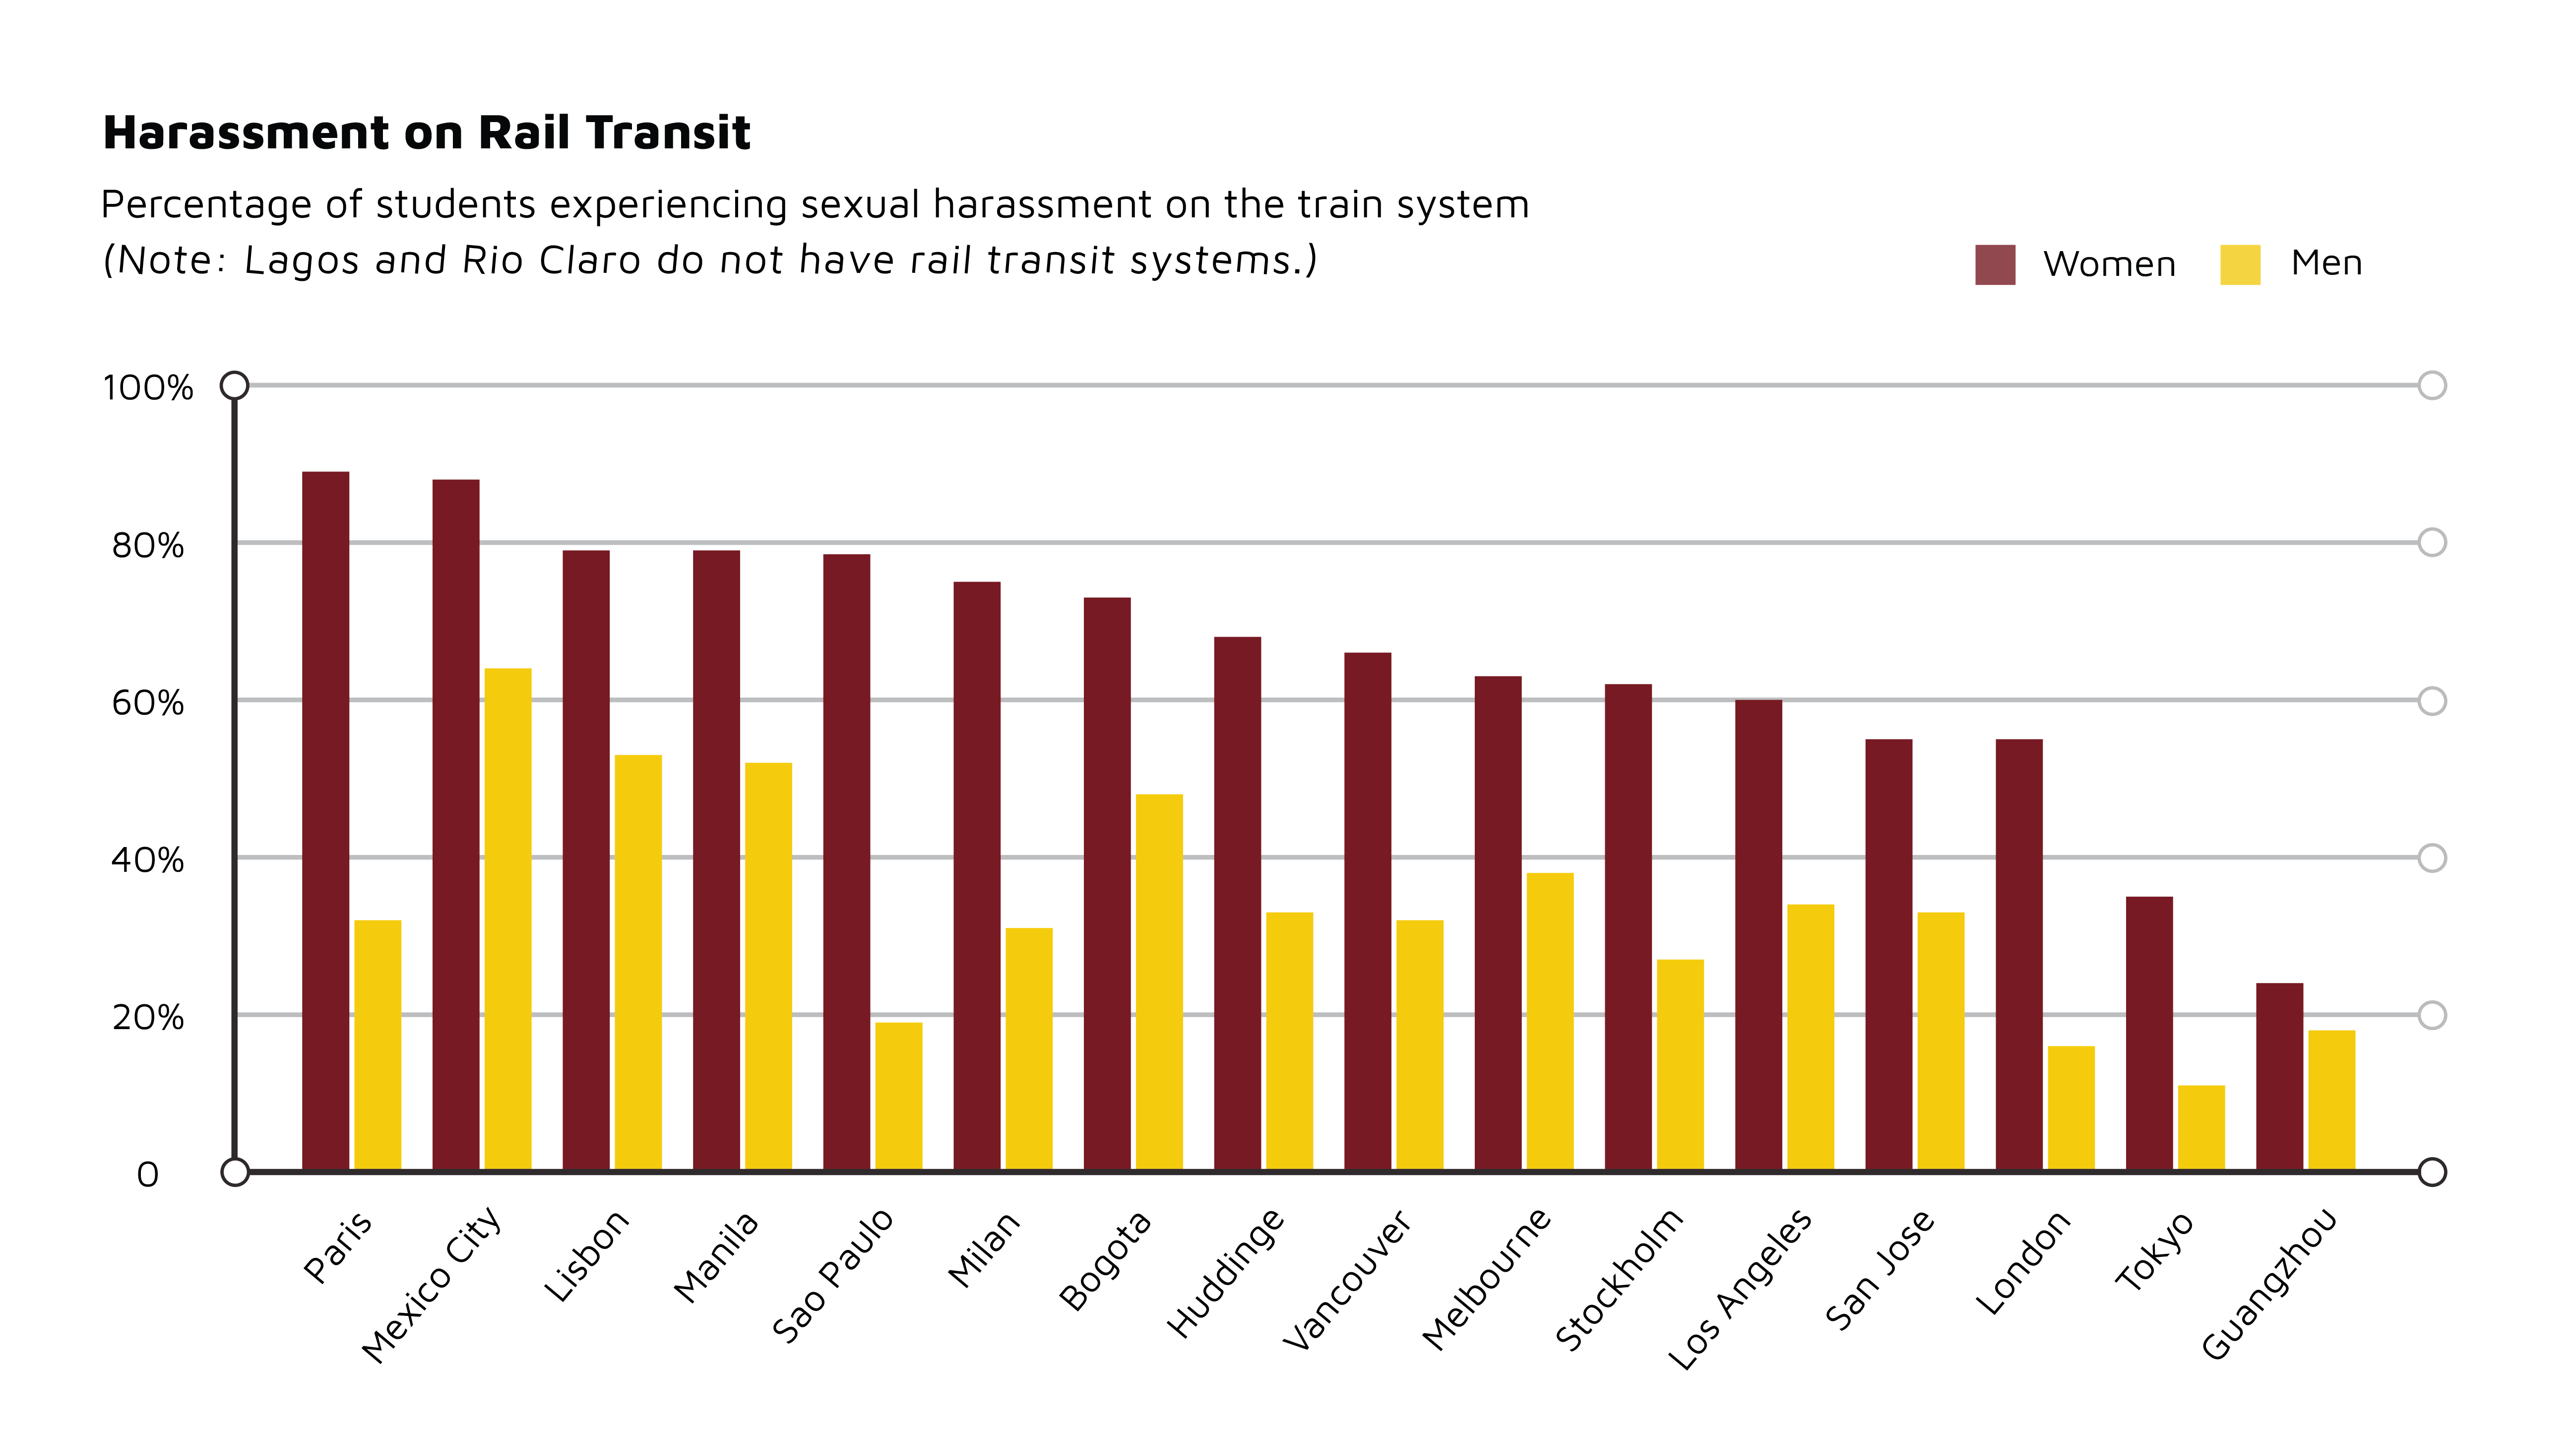 Percentage of students experiencing sexual harassment on rail transit